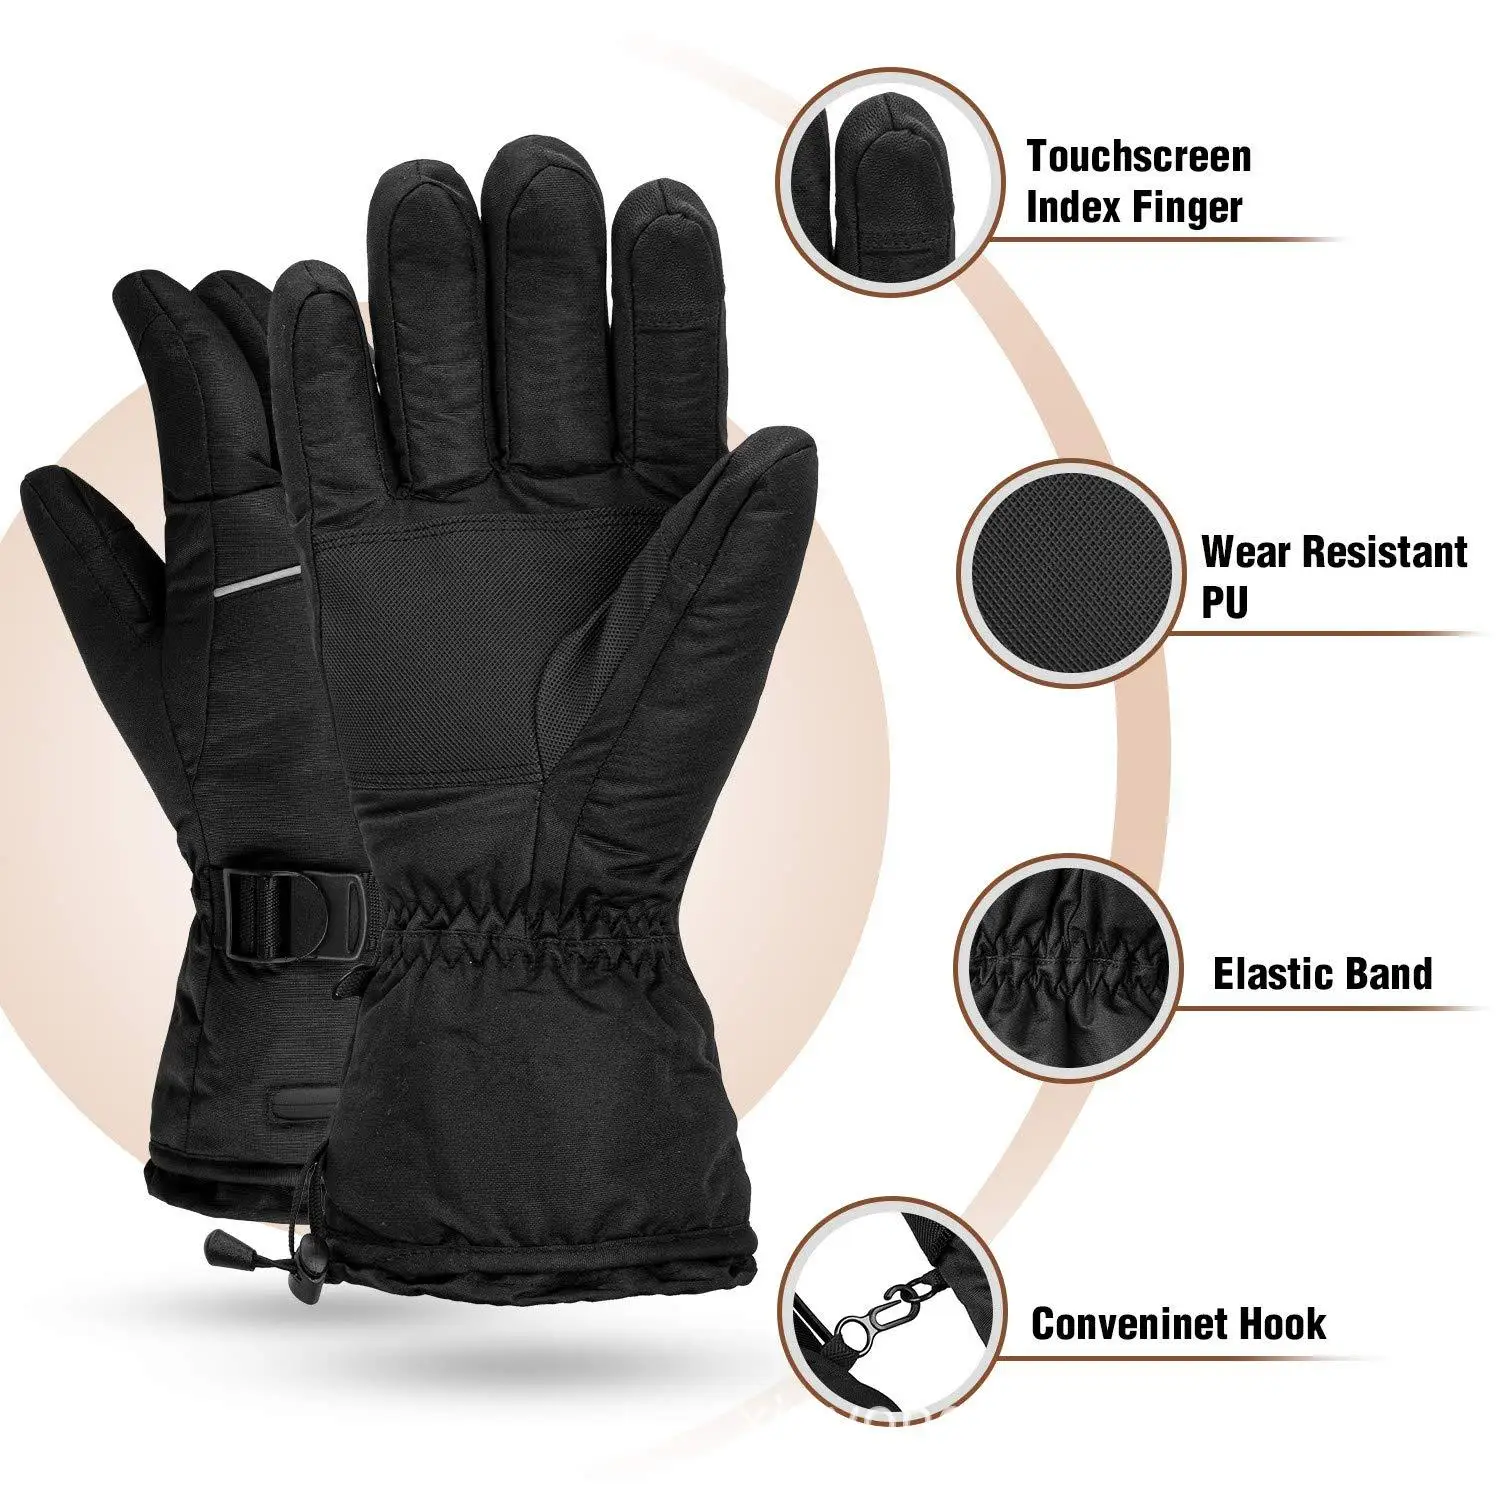 2021 heated gloves leather motorcycling skiing outdoor electric heat gloves ski winter men and women heat ski gloves